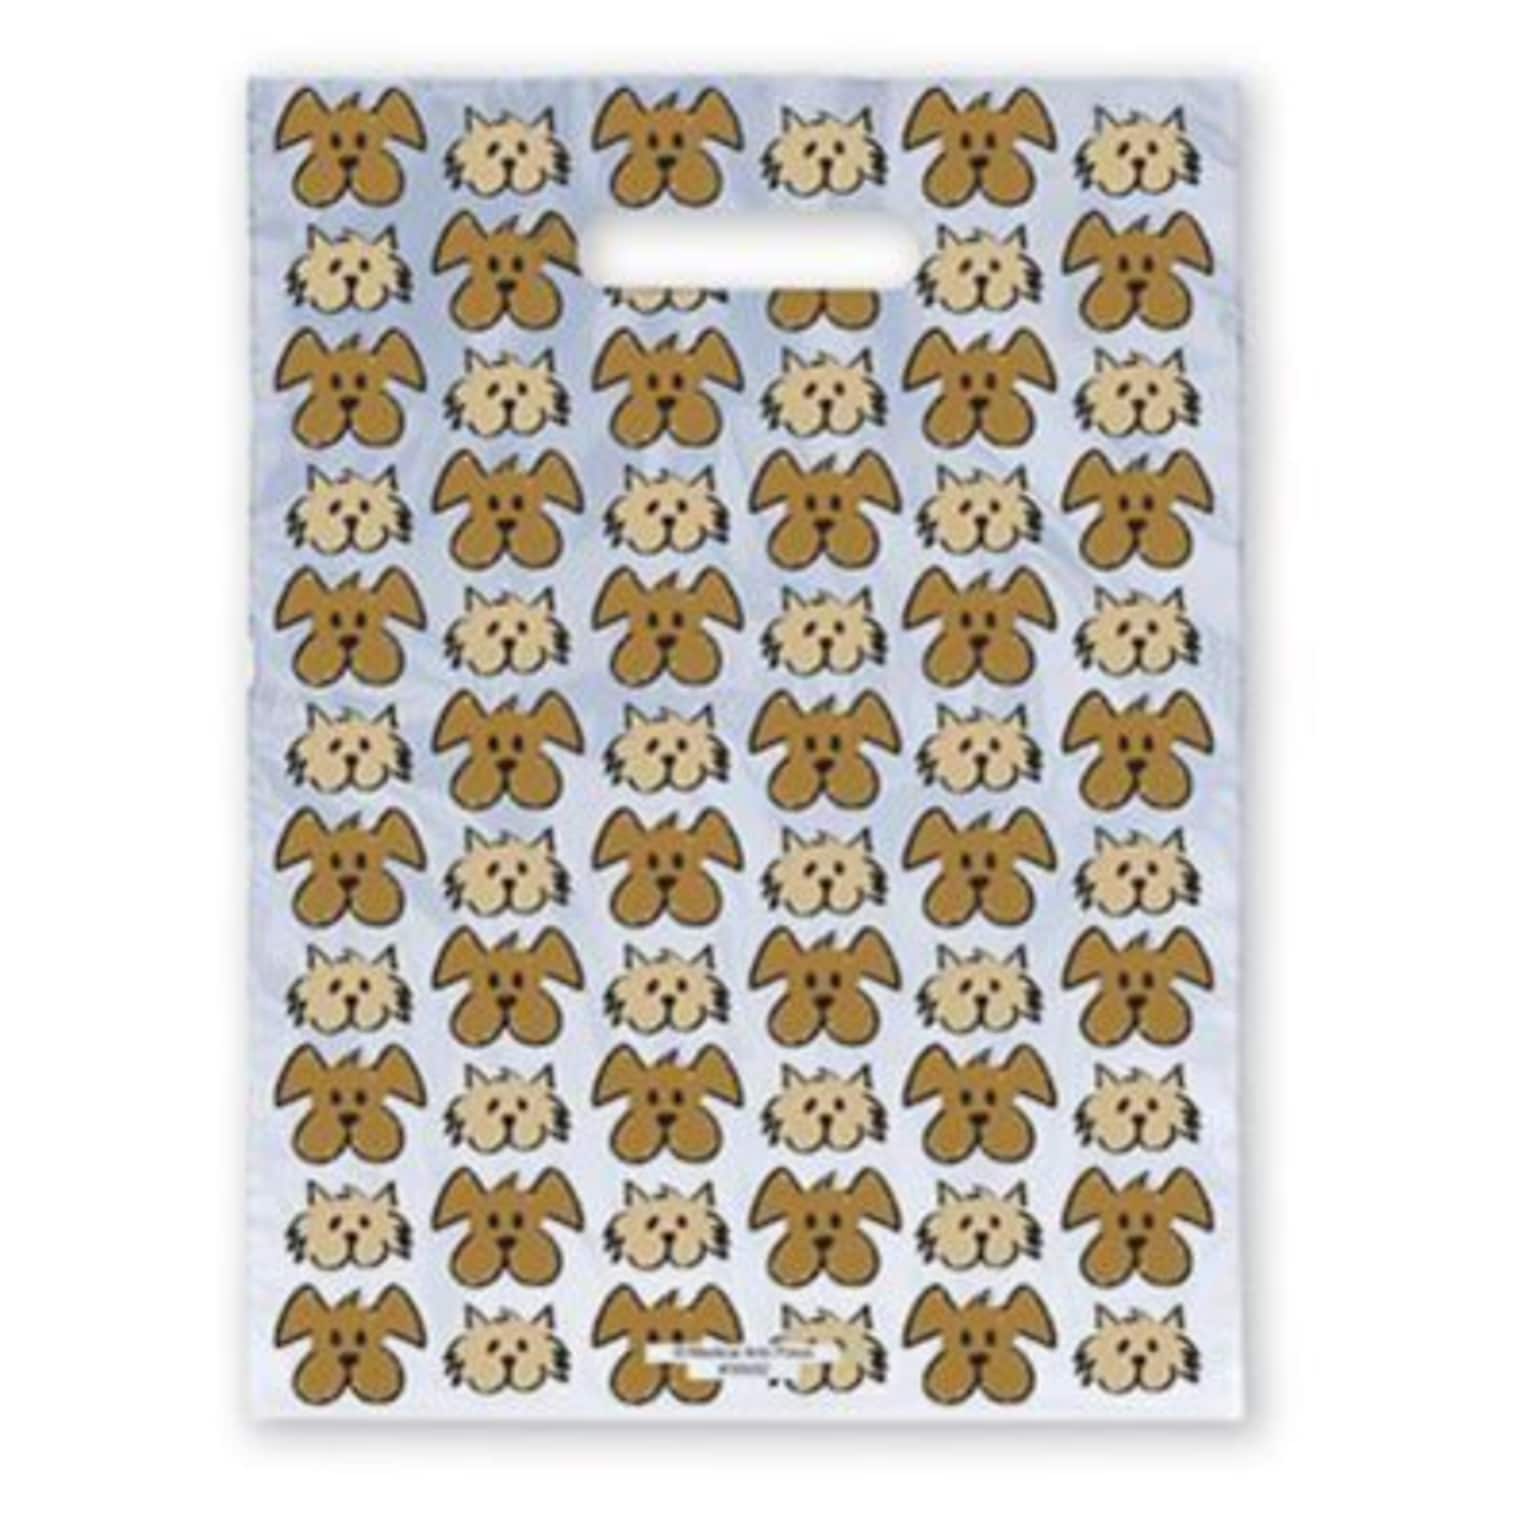 Medical Arts Press® Veterinary Scatter Print Bags,11x15,  Dog and Cat Heads